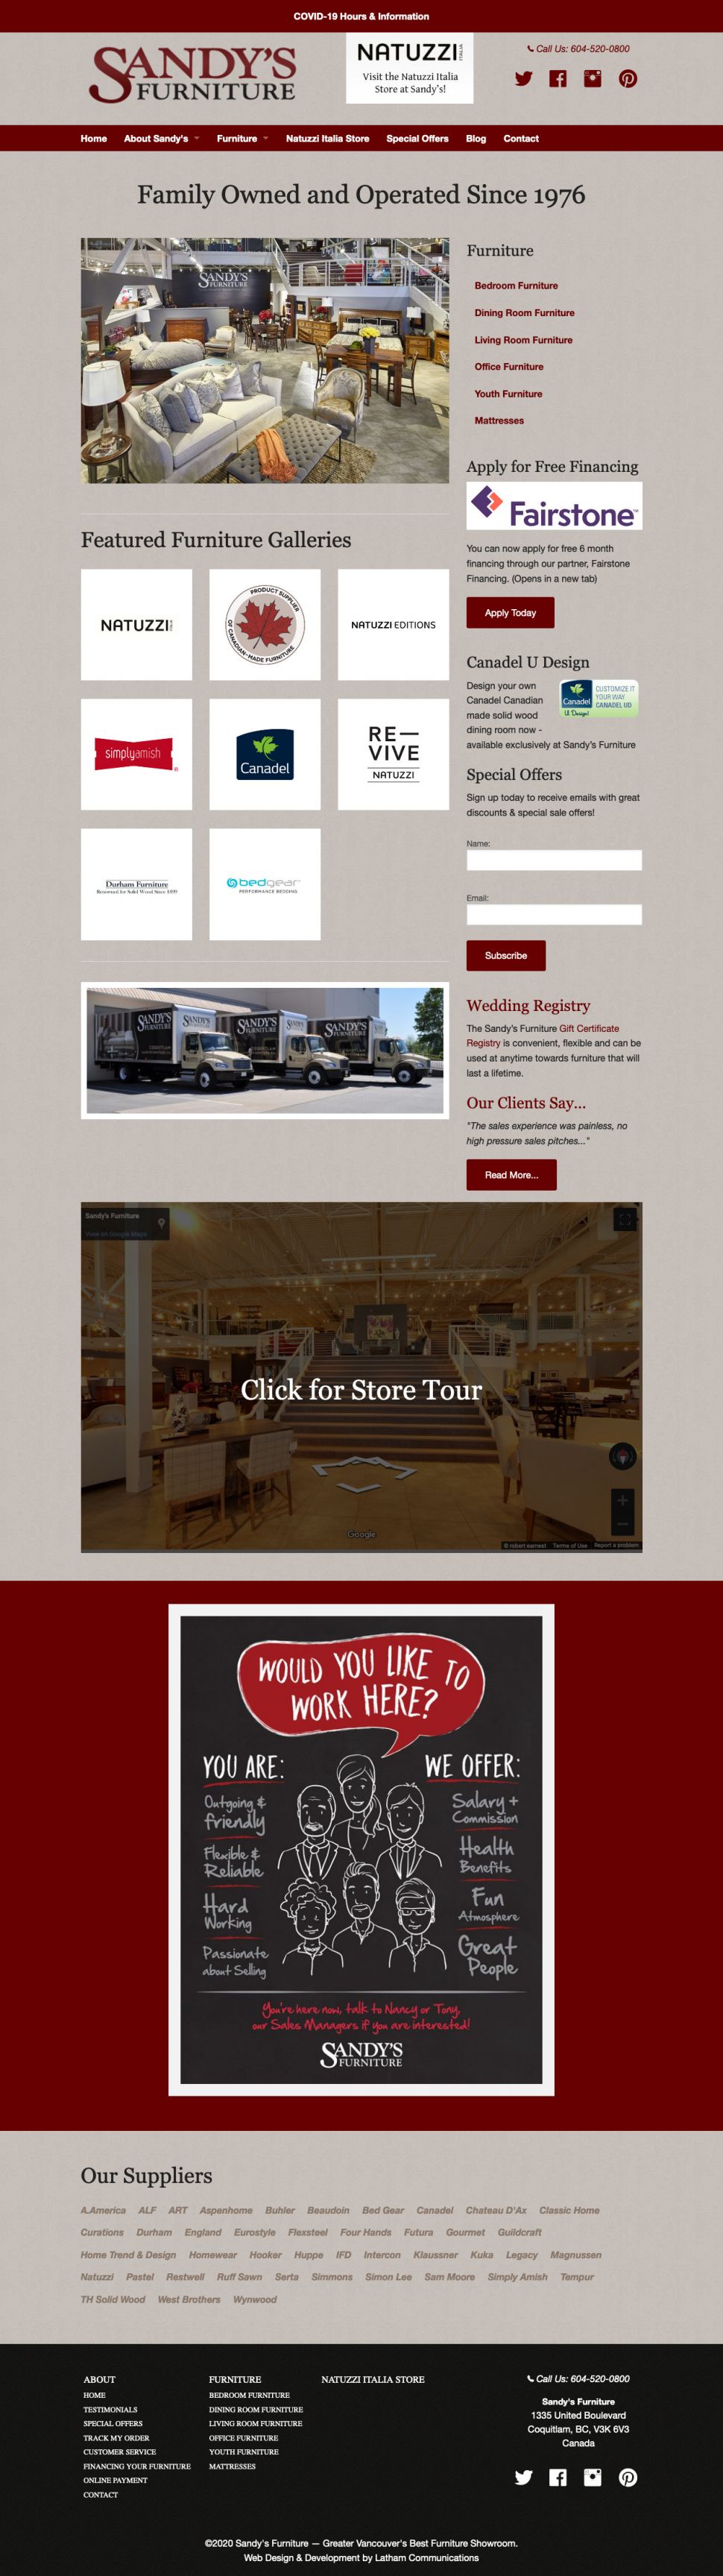 Screenshot of Sandy's Furniture website home page.